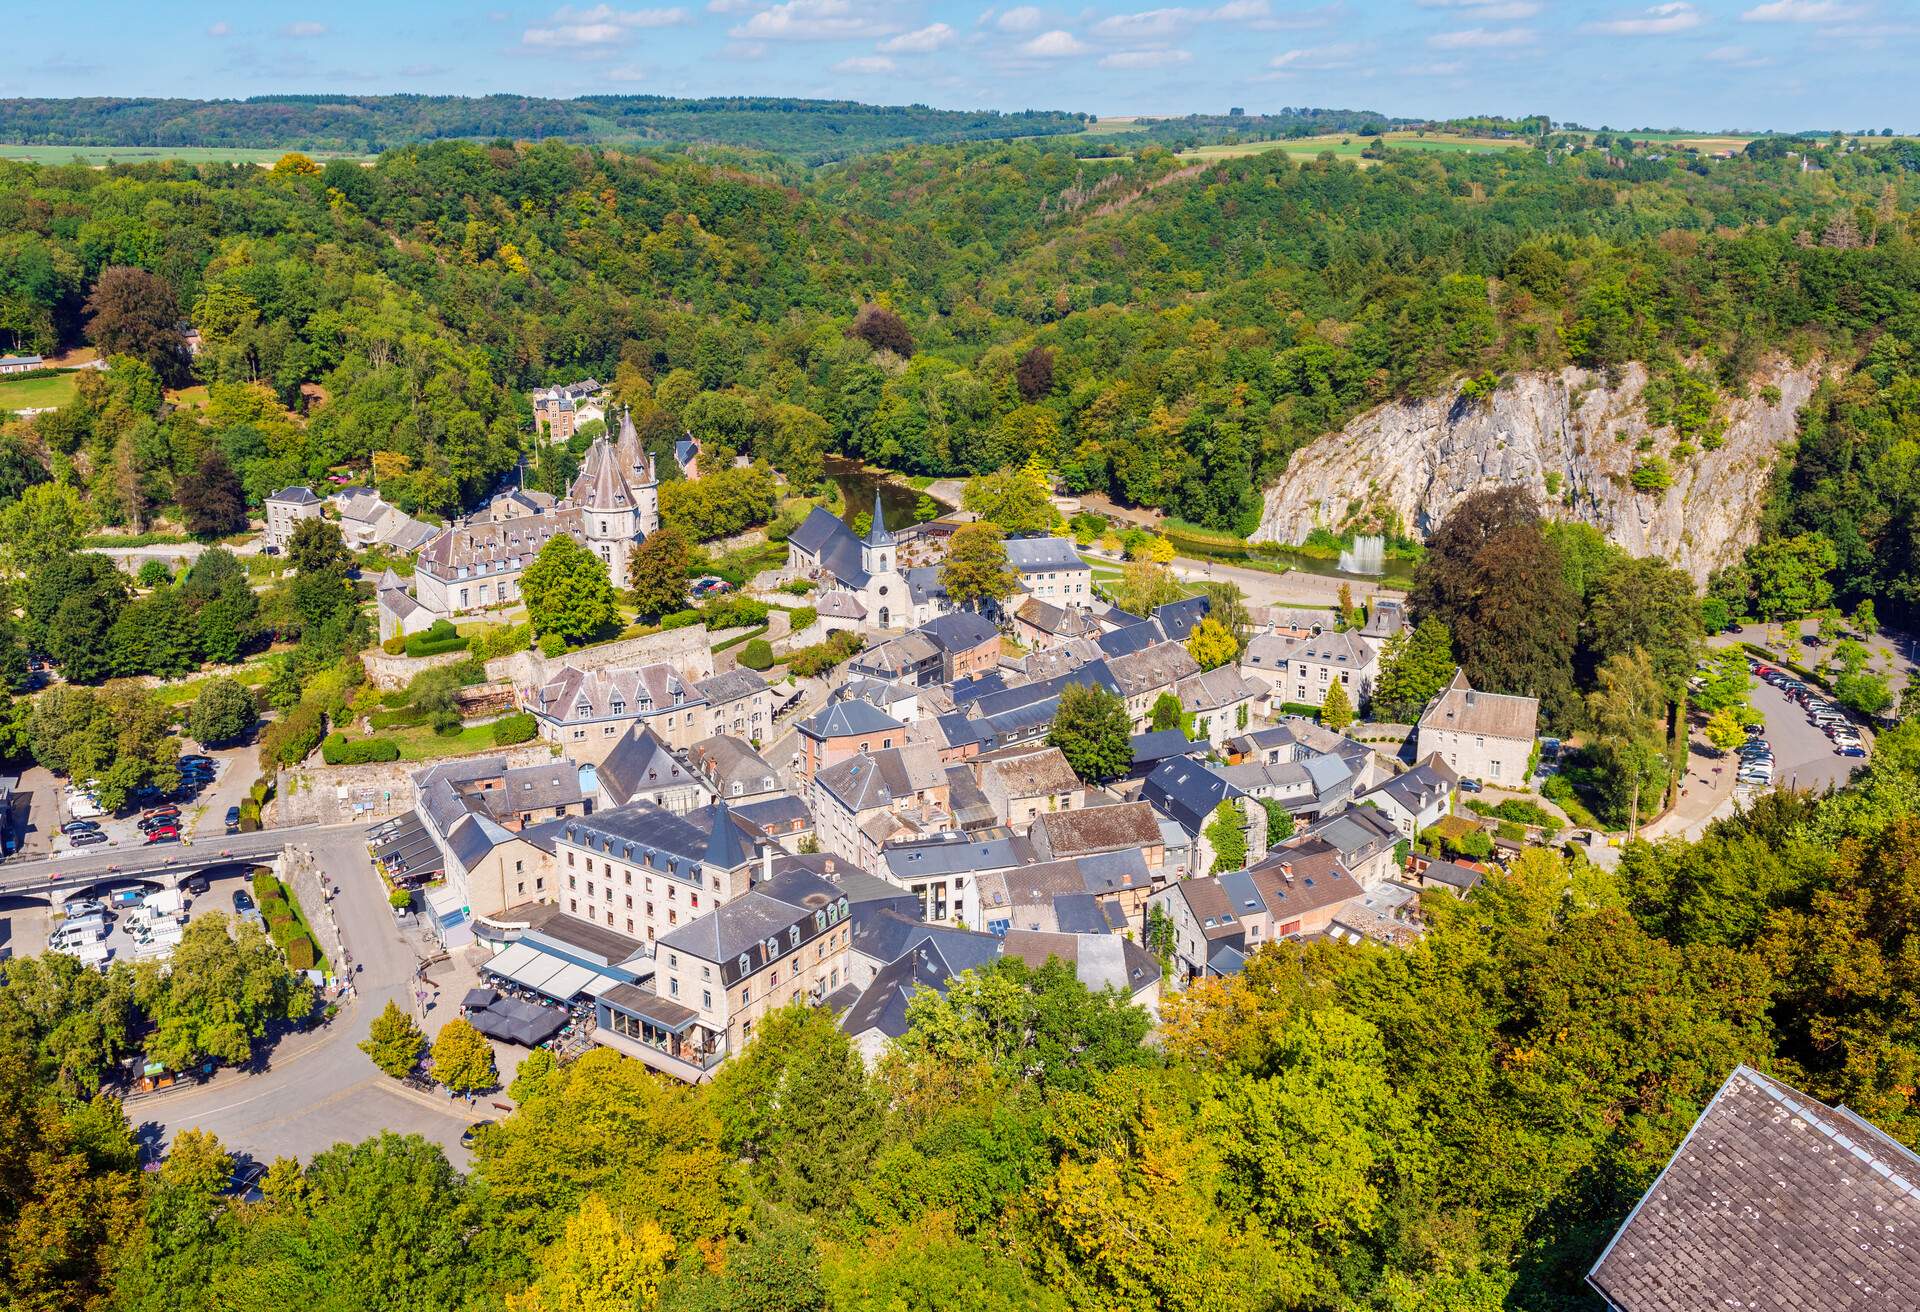 High angle view on the Village of Durbuy in the Luxembourg Province and Ardennes Region of Wallonia, Belgium.